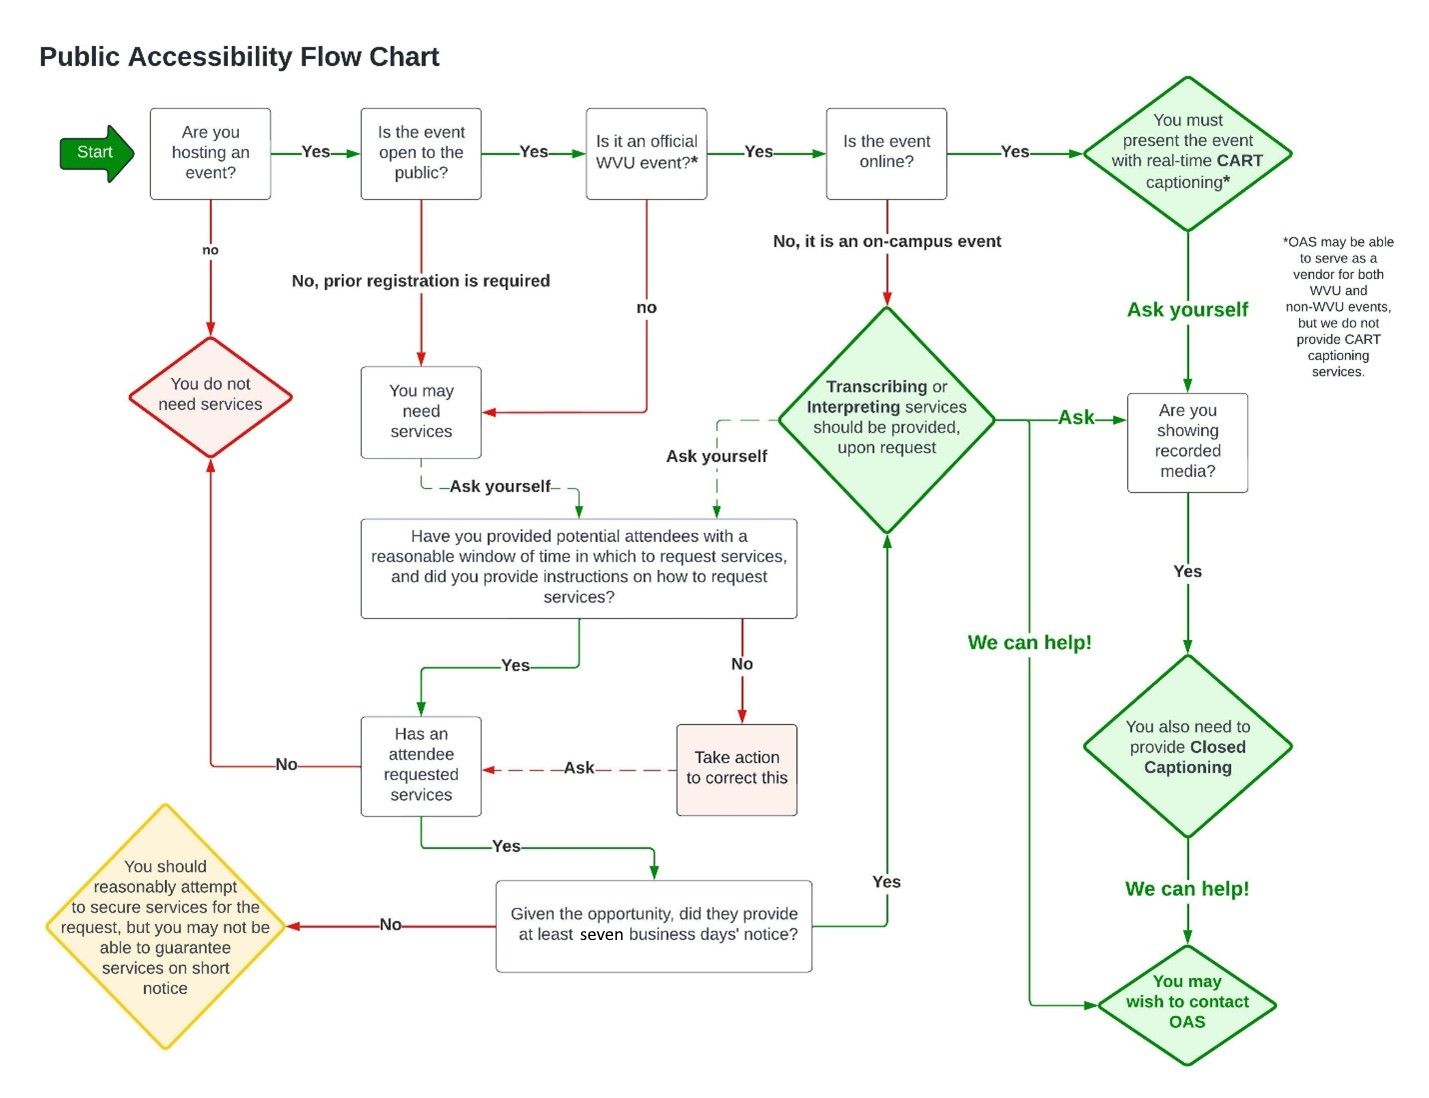 A public accessibility flow chart. A text-based description is available at the link below the image.